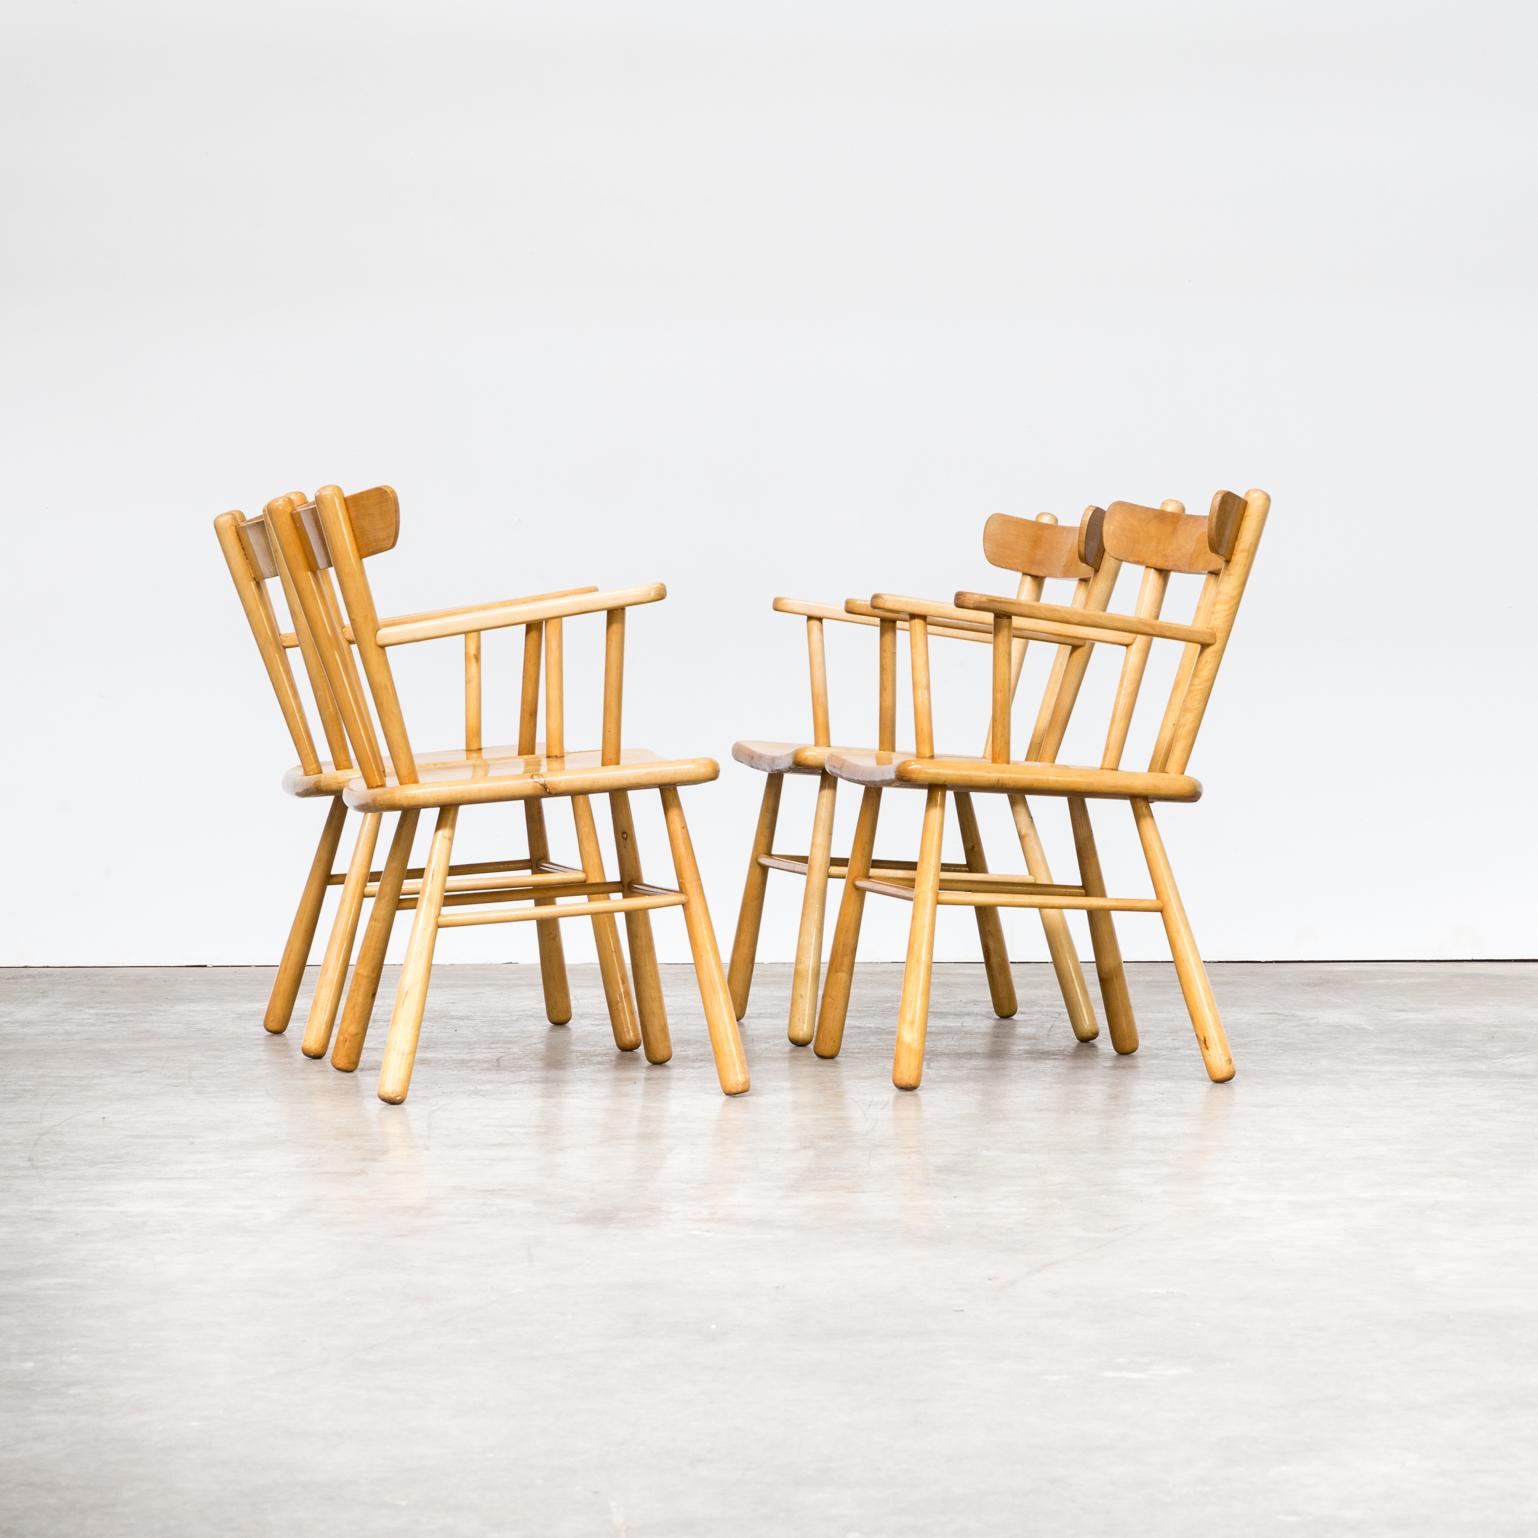 1970s Oak Round Wood Dining Chair Set of 4 In Good Condition For Sale In Amstelveen, Noord